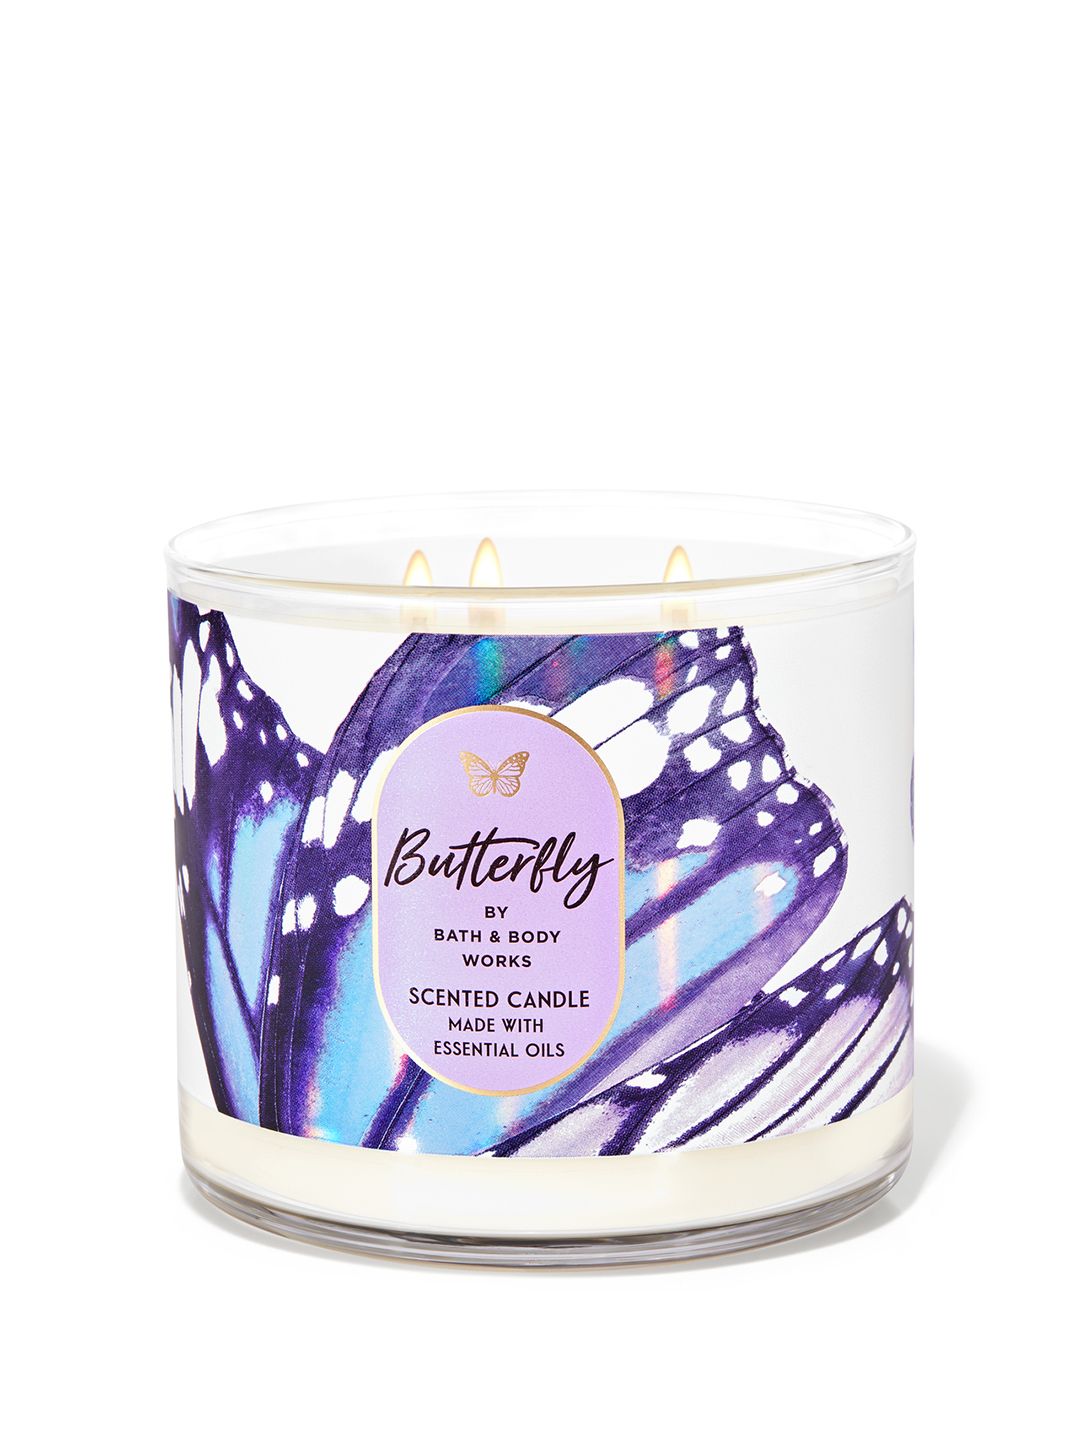 Bath & Body Works Butterfly 3-Wick Candle - 411 g Price in India